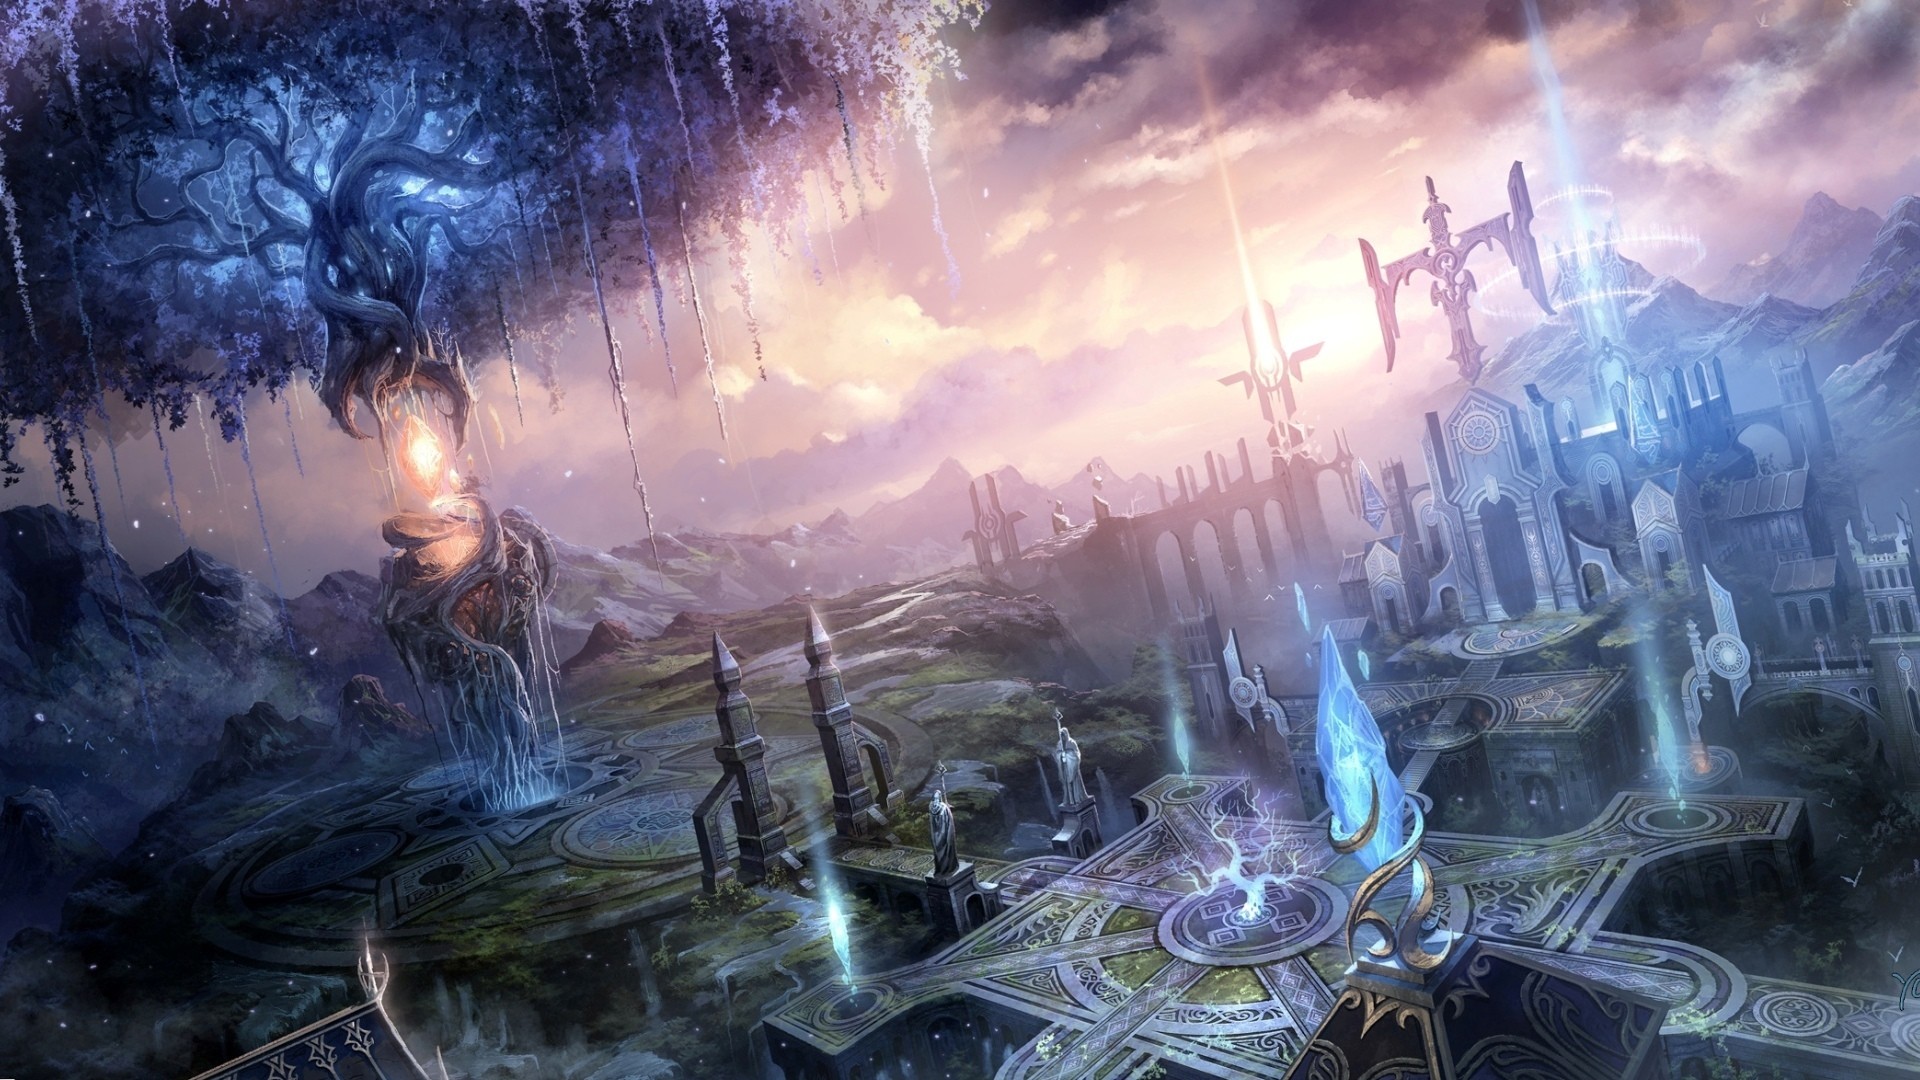 1920x1080 Anime Fantasy Landscape Wallpapers Images